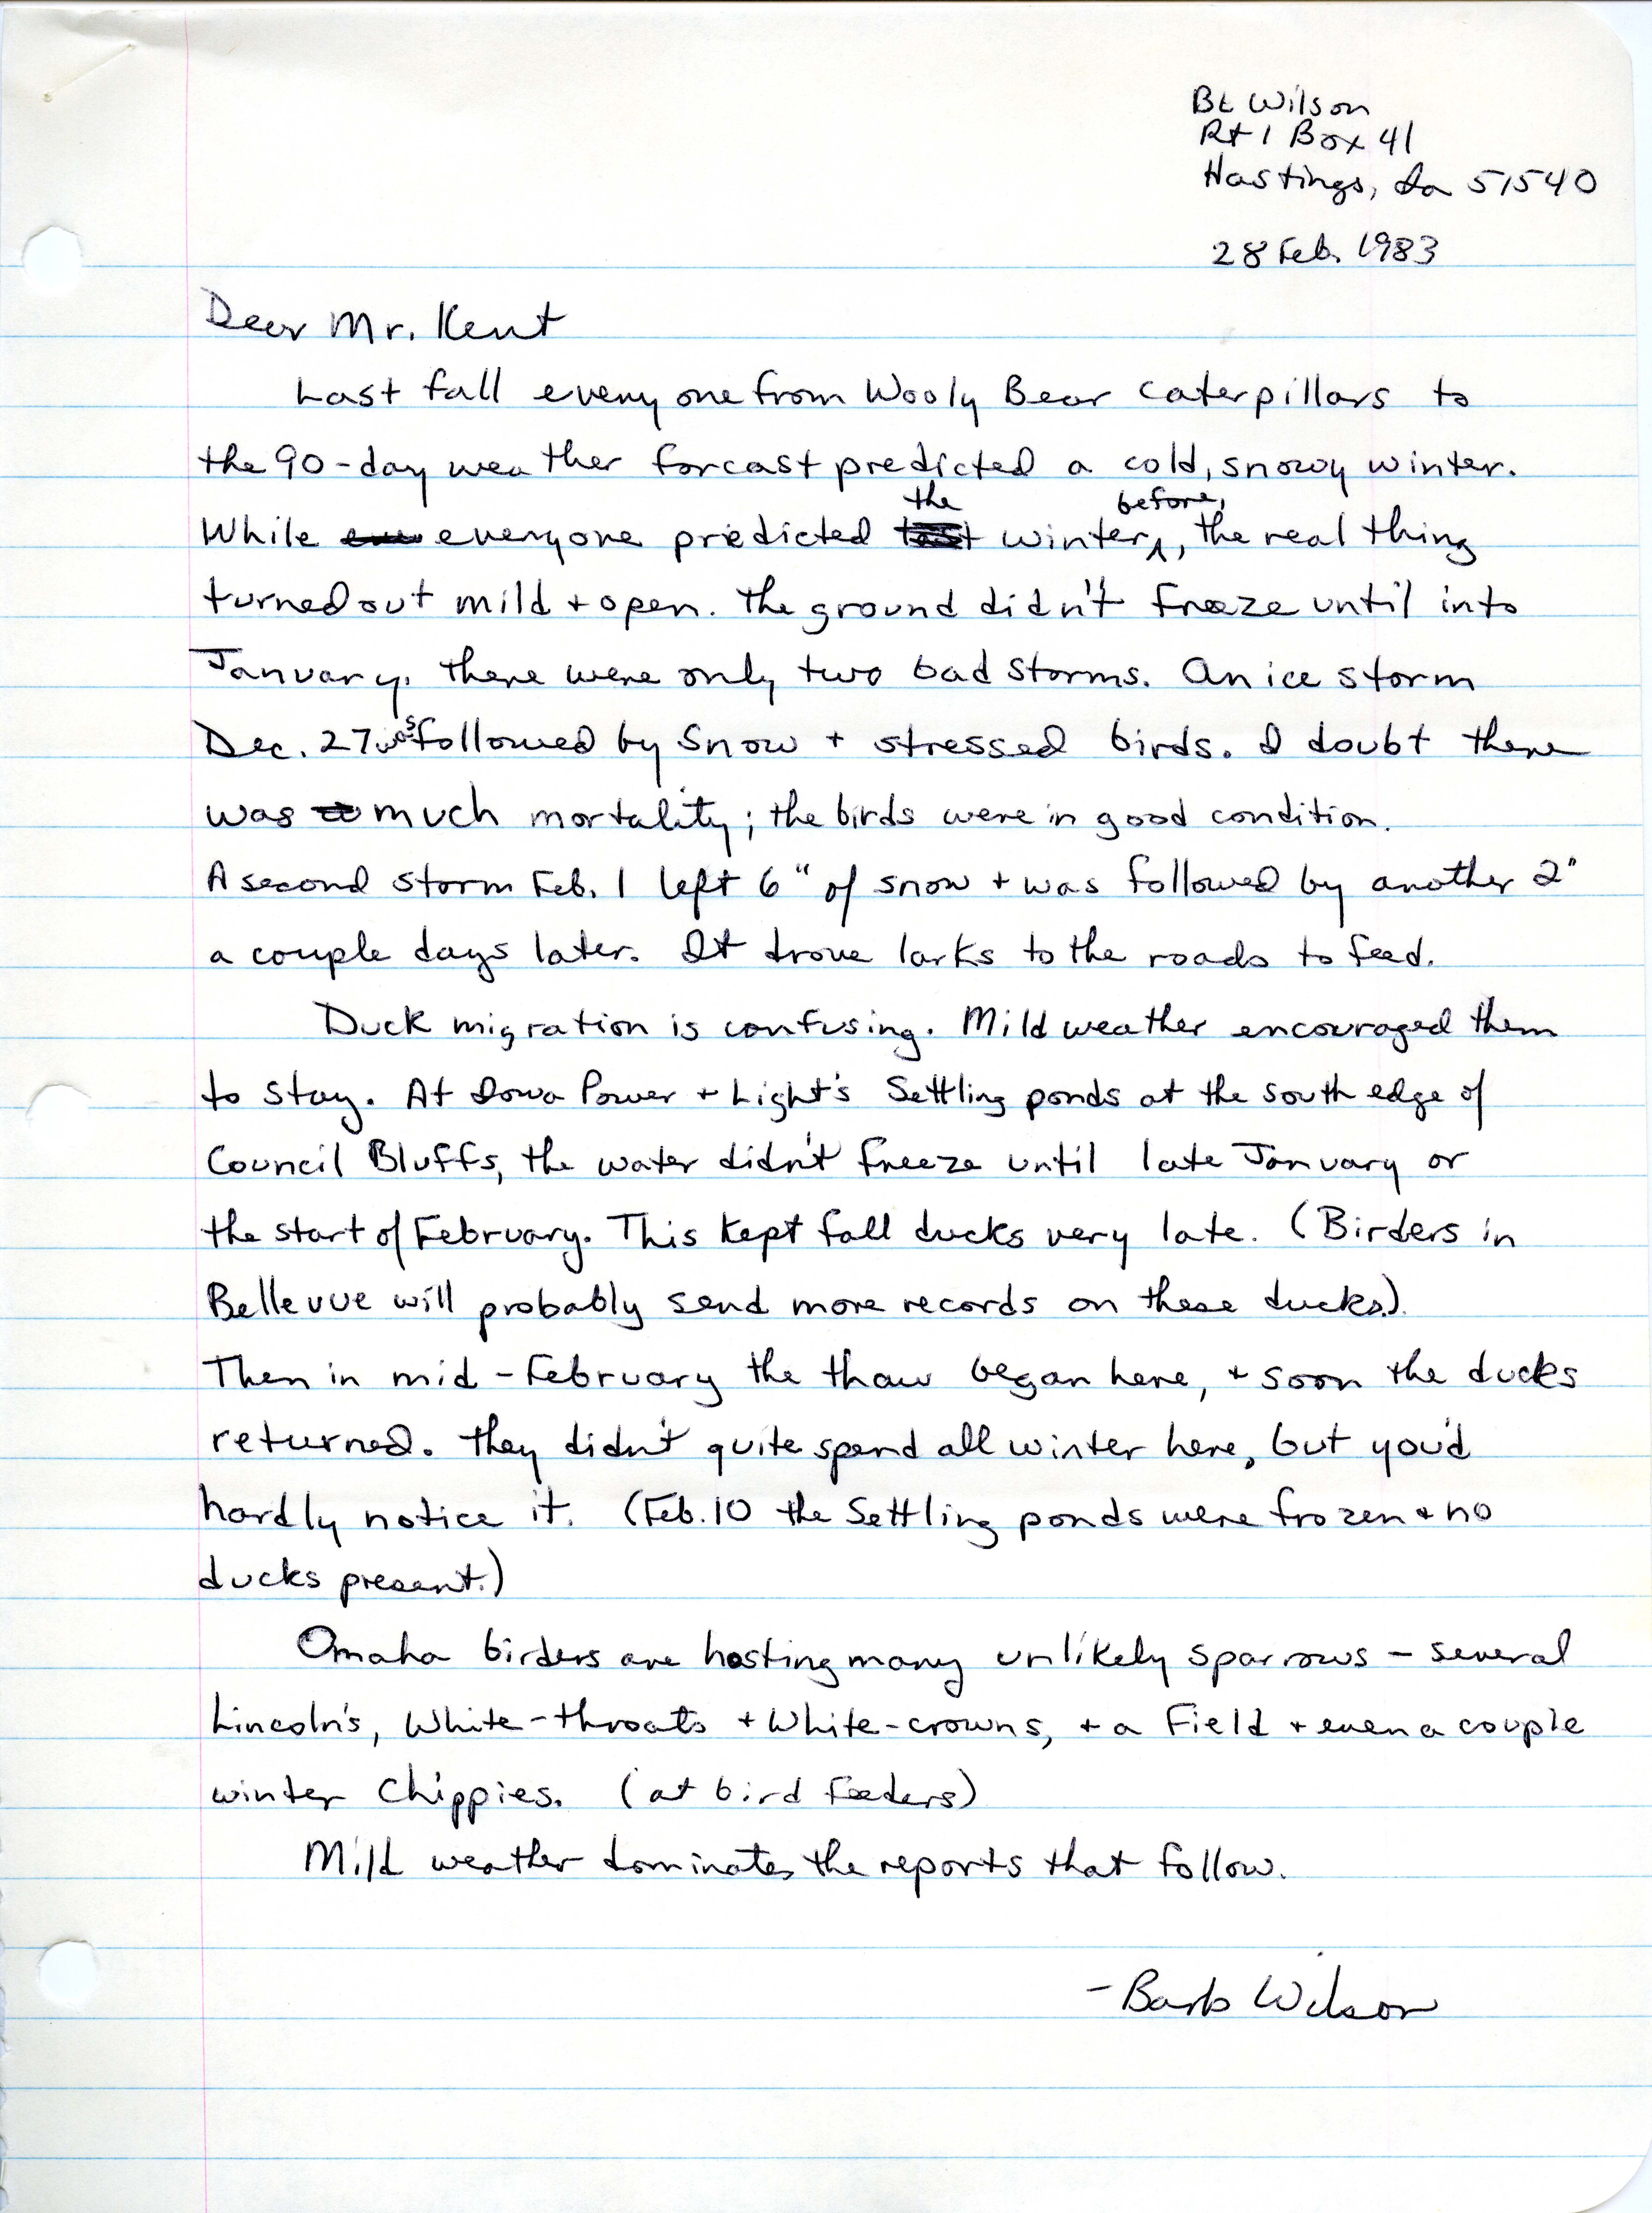 Barbara L. Wilson letter to Thomas H. Kent regarding winter bird sightings and the Hairy Woodpecker population, February 28, 1983